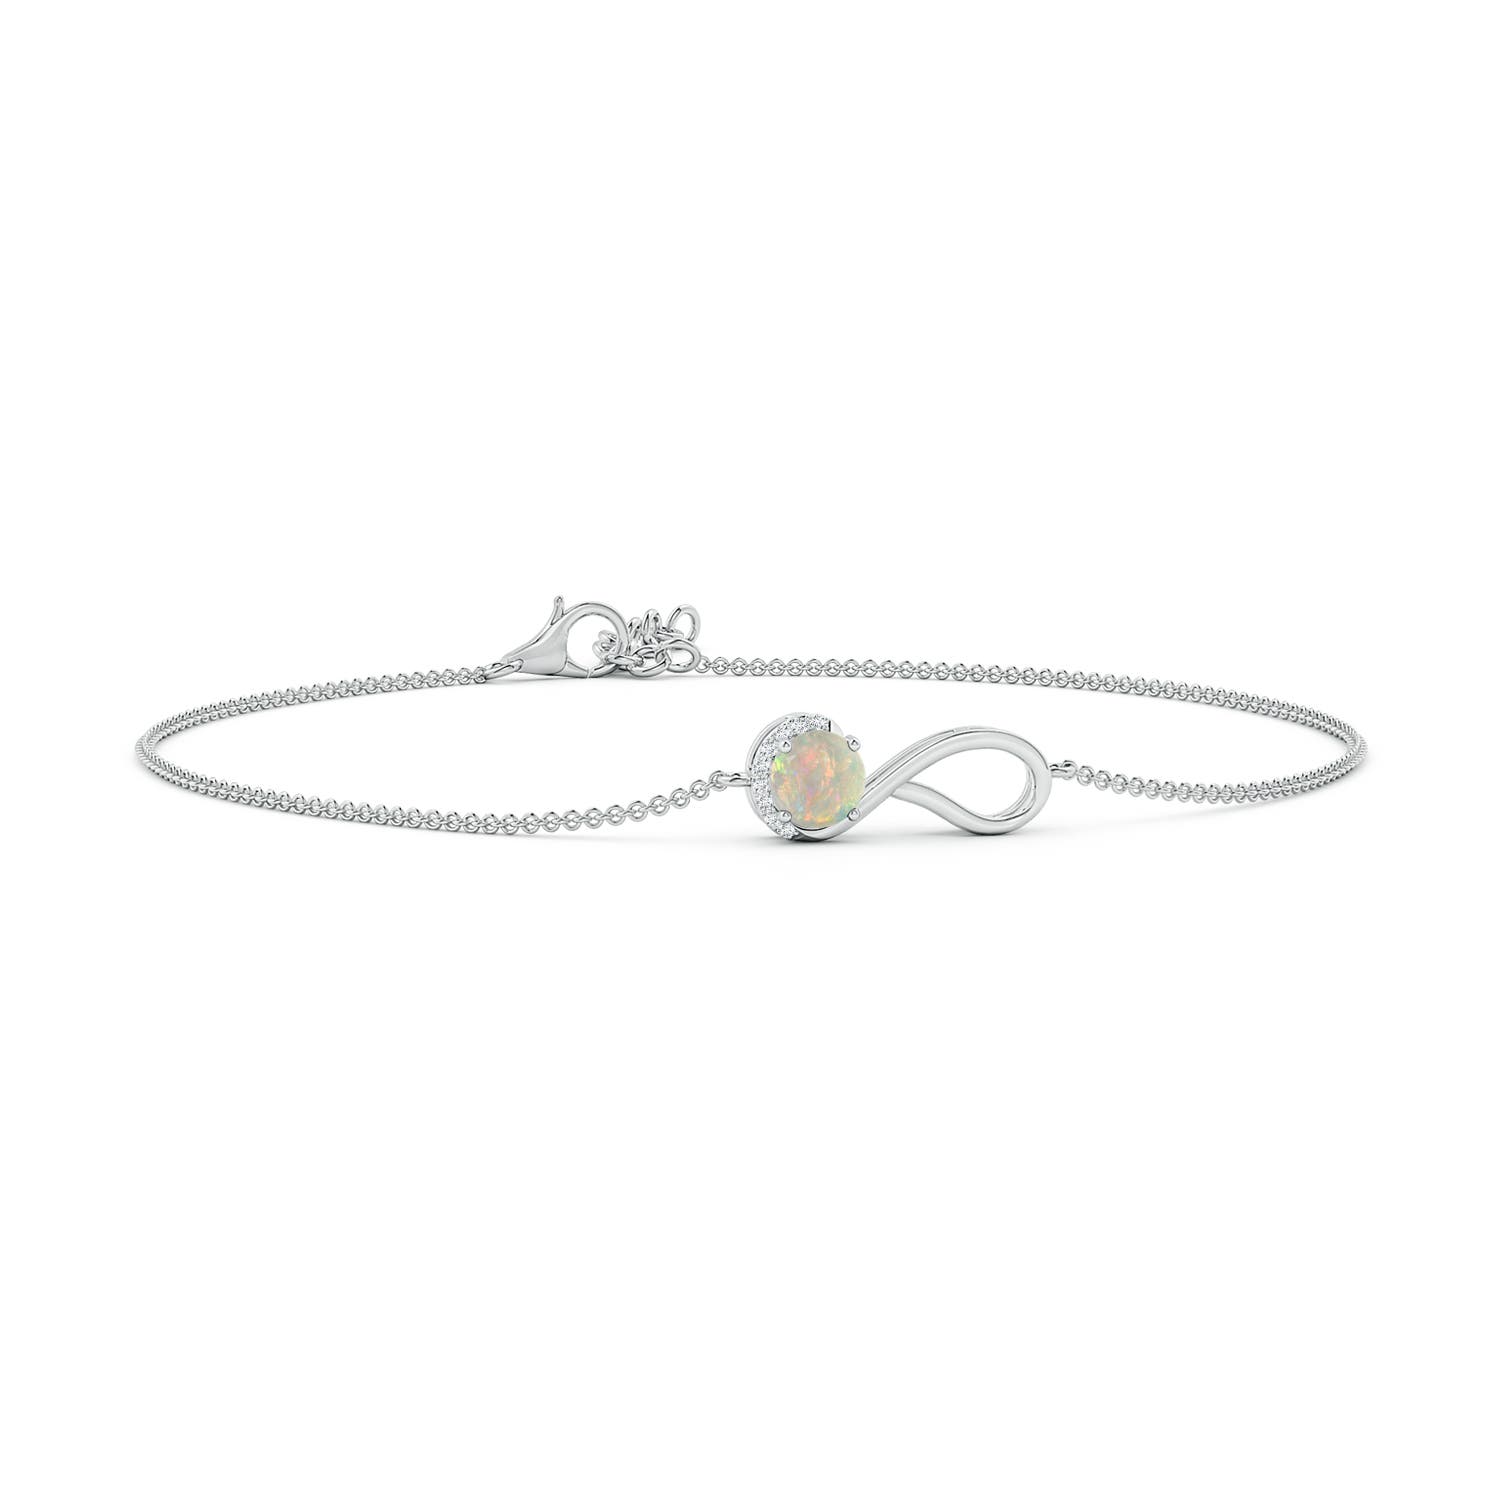 Buy LIBRA Zodiac Miracle Crystal Bracelet Online From Premium Crystal Store  at Best Price - The Miracle Hub